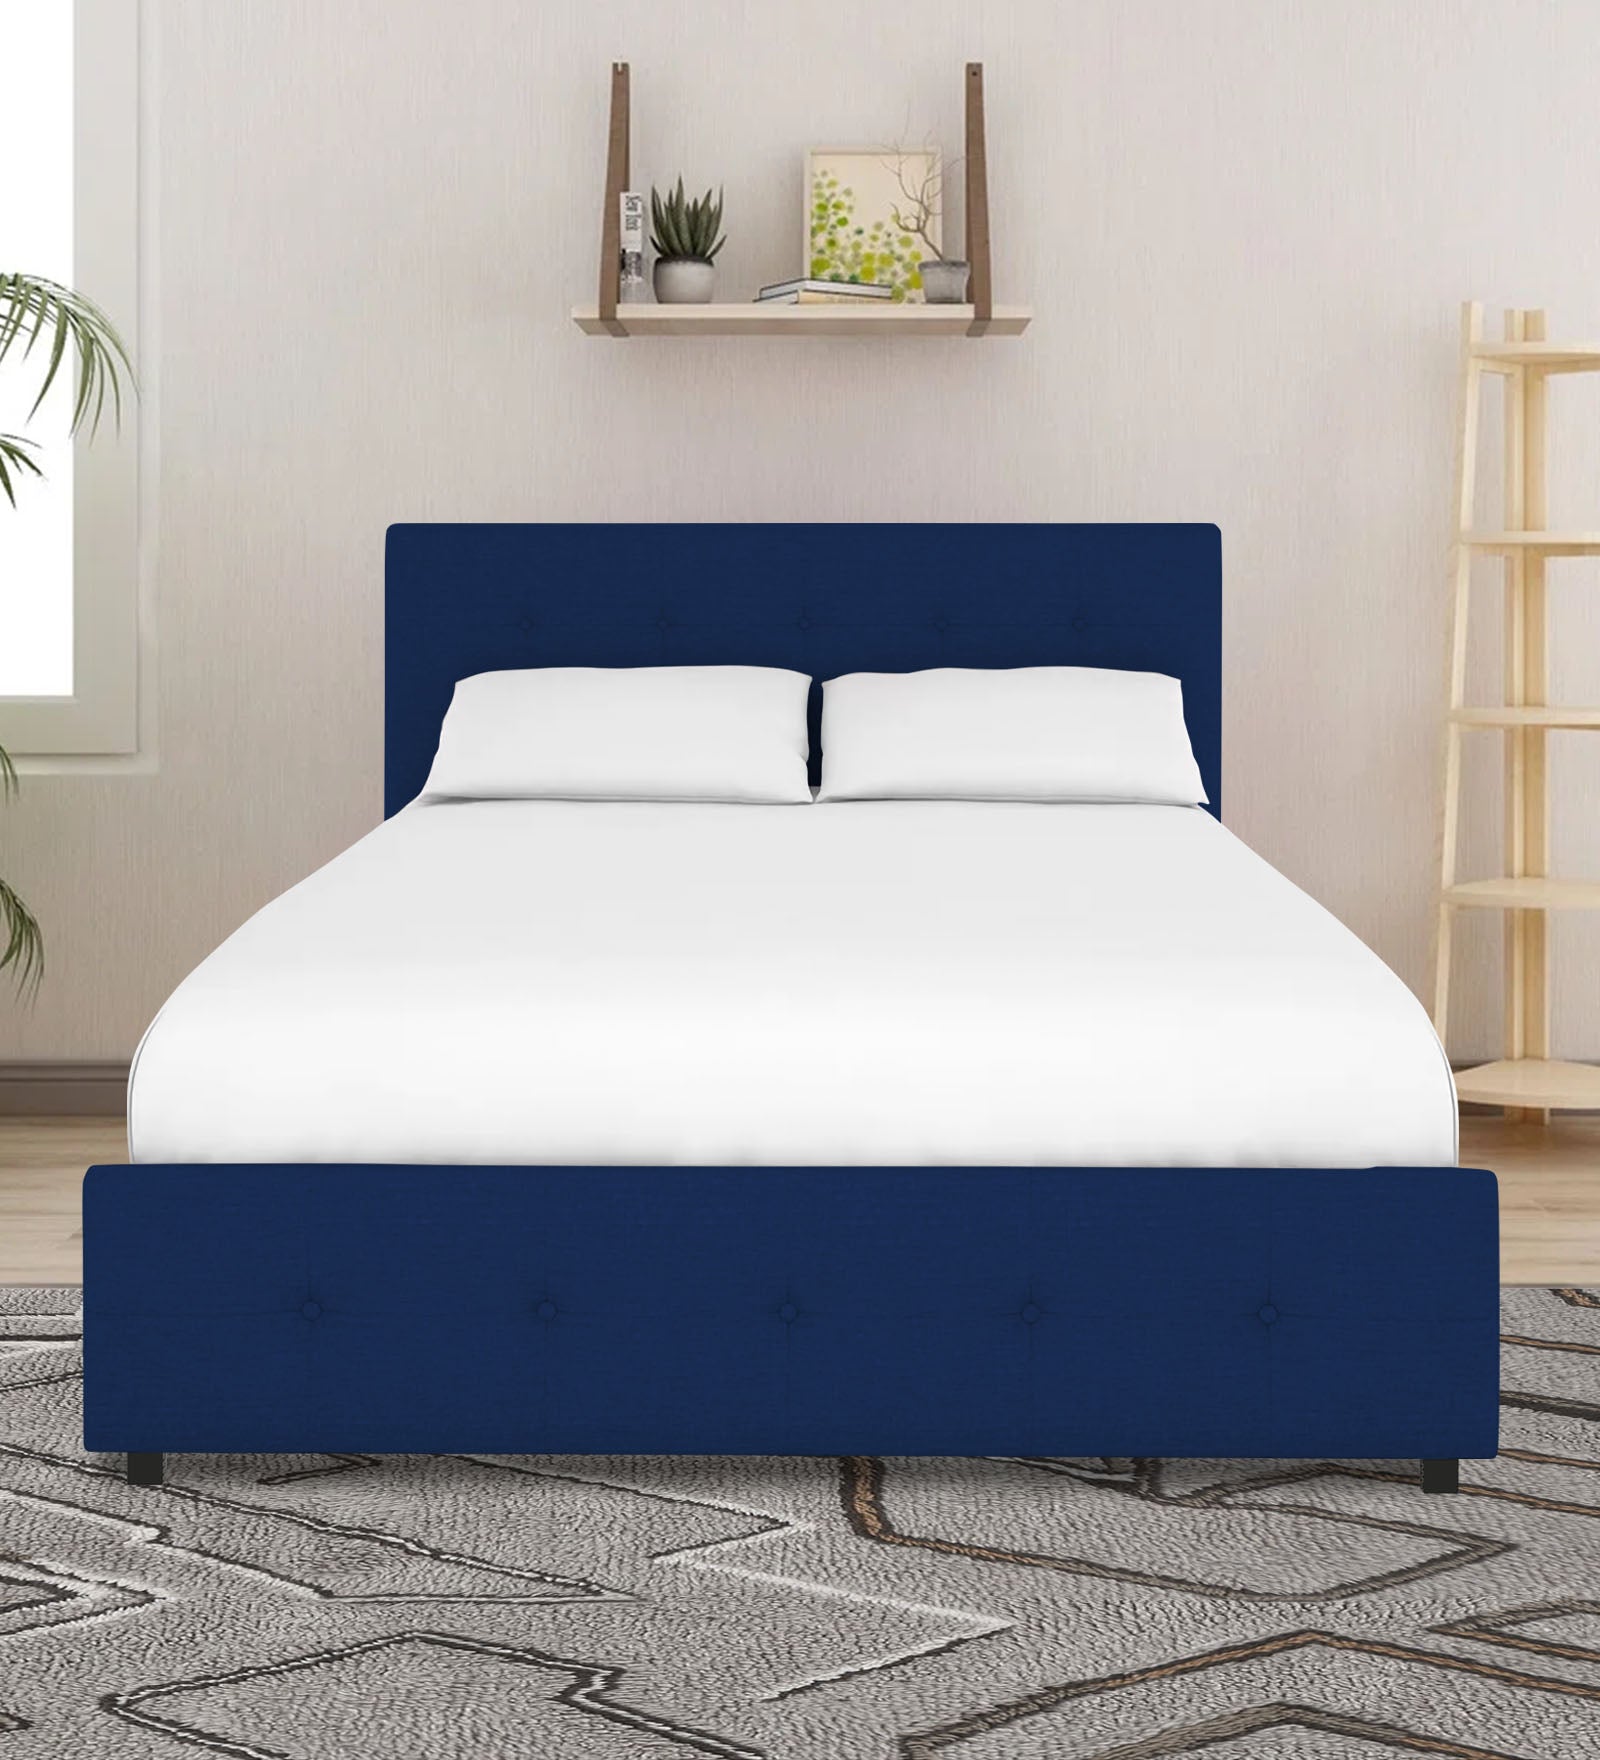 Lido Fabric Queen Size Bed In Royal Blue Colour With Storage